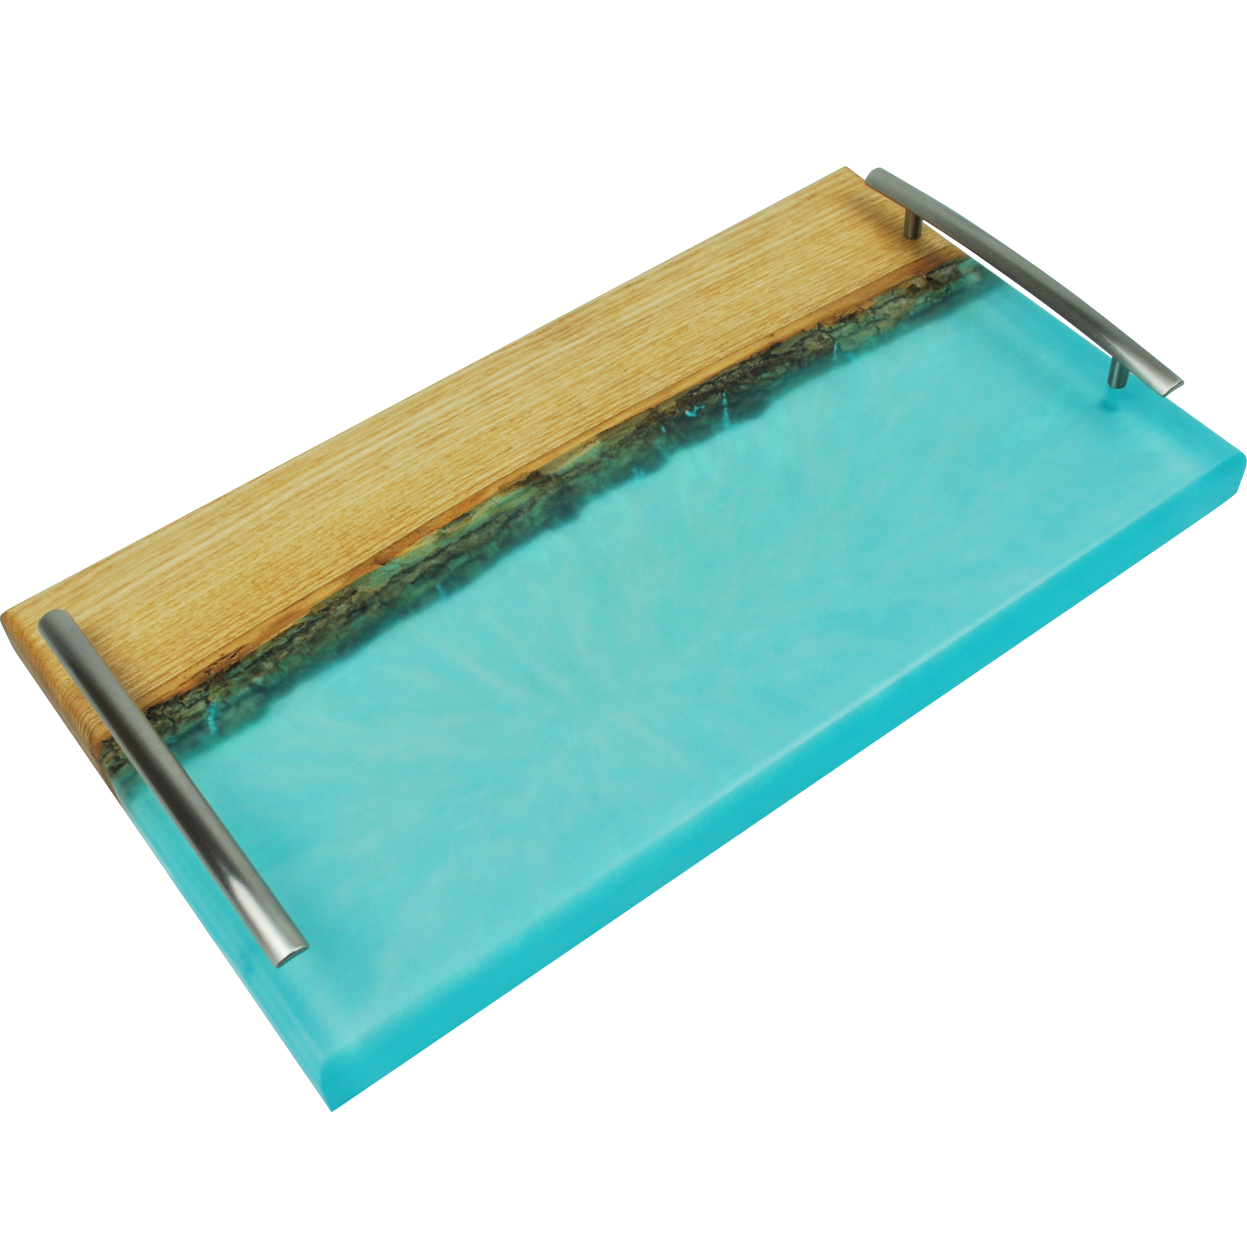 Live Edge Epoxy - Ash Wood Cutting Board - Serving Board - Food Safe Resin - Serving Platter - With Handles